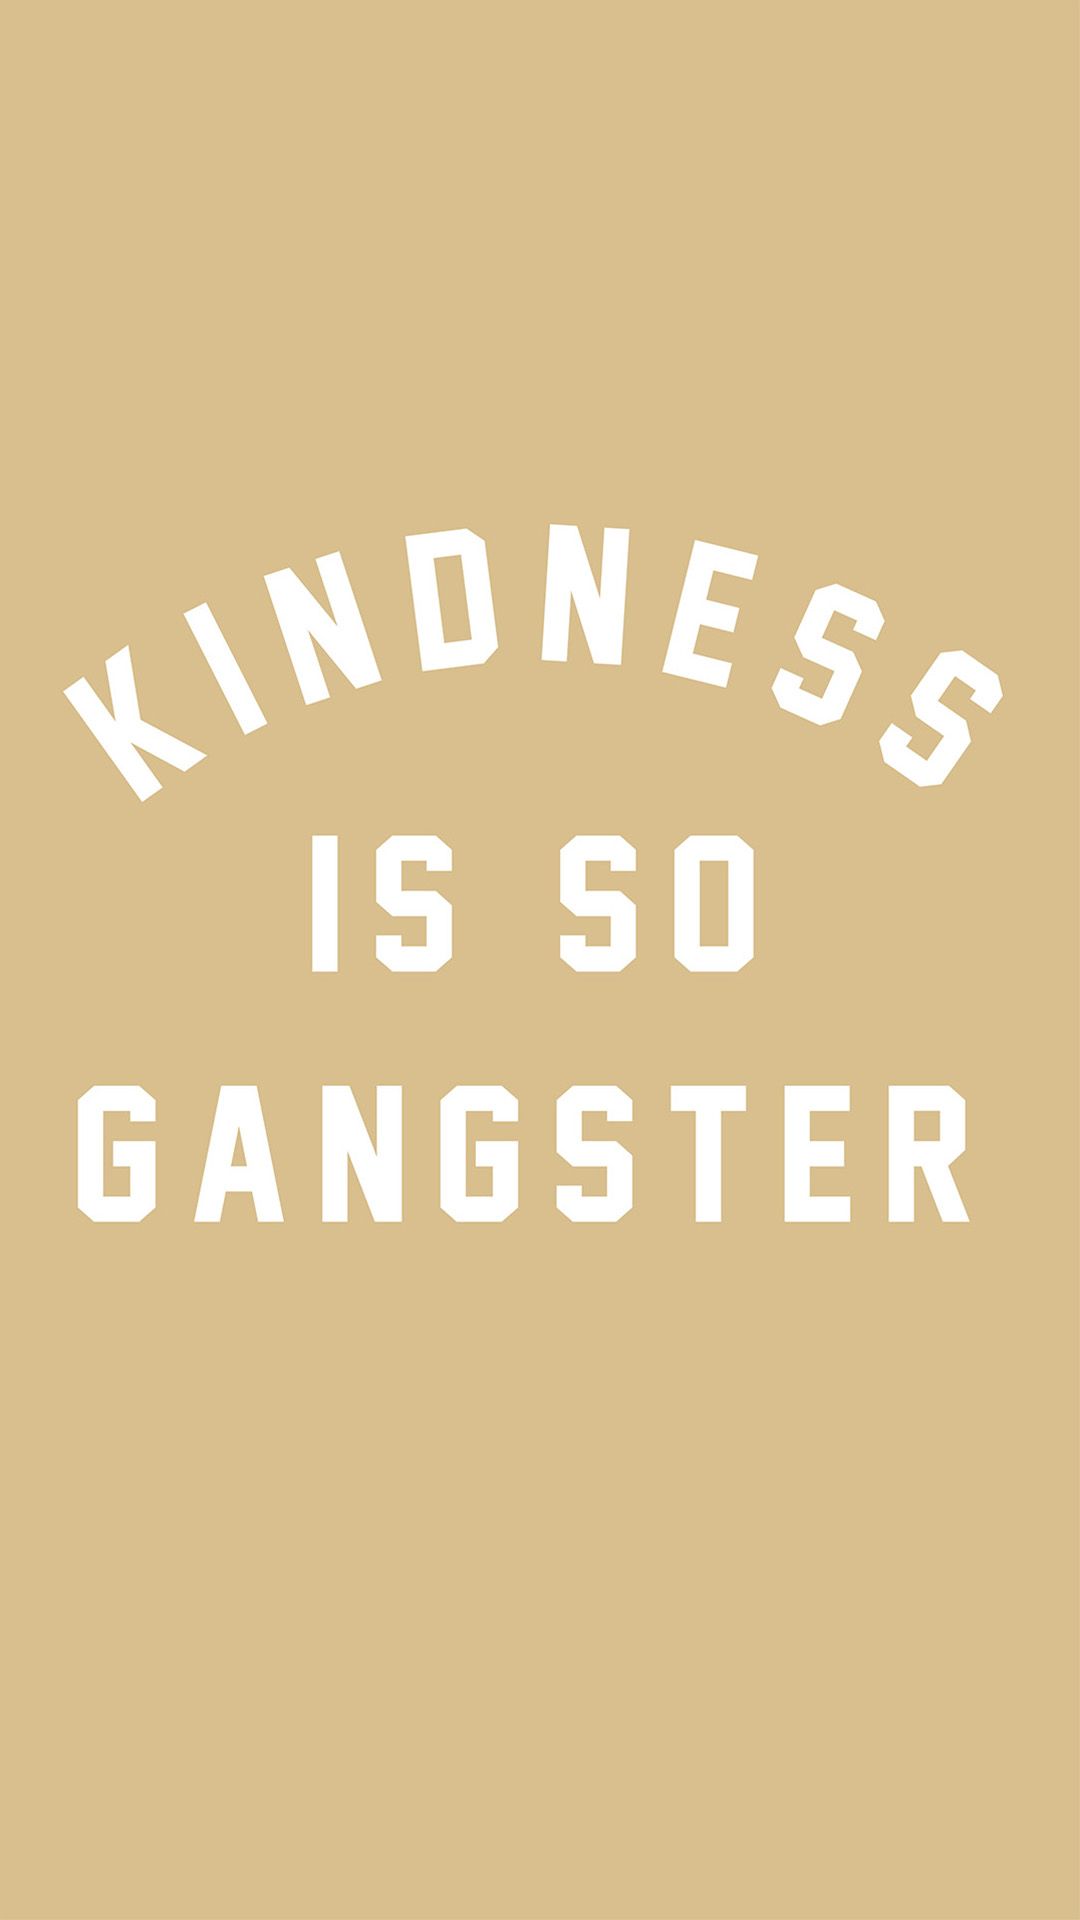 Kindness Is Gangster Background - 1080x1920 Wallpaper 